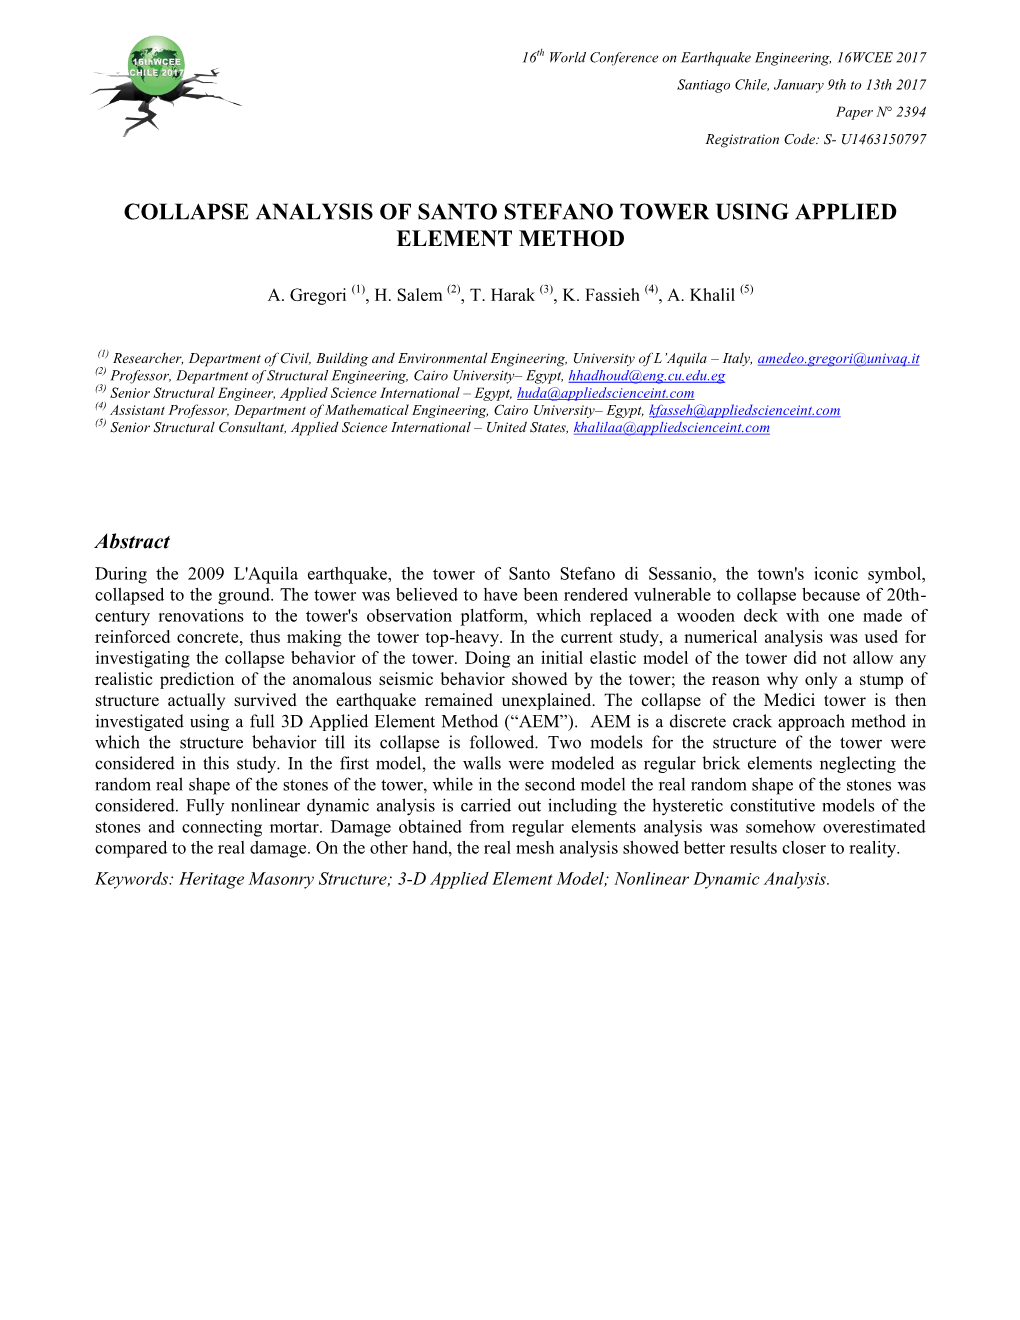 Collapse Analysis of Santo Stefano Tower Using Applied Element Method